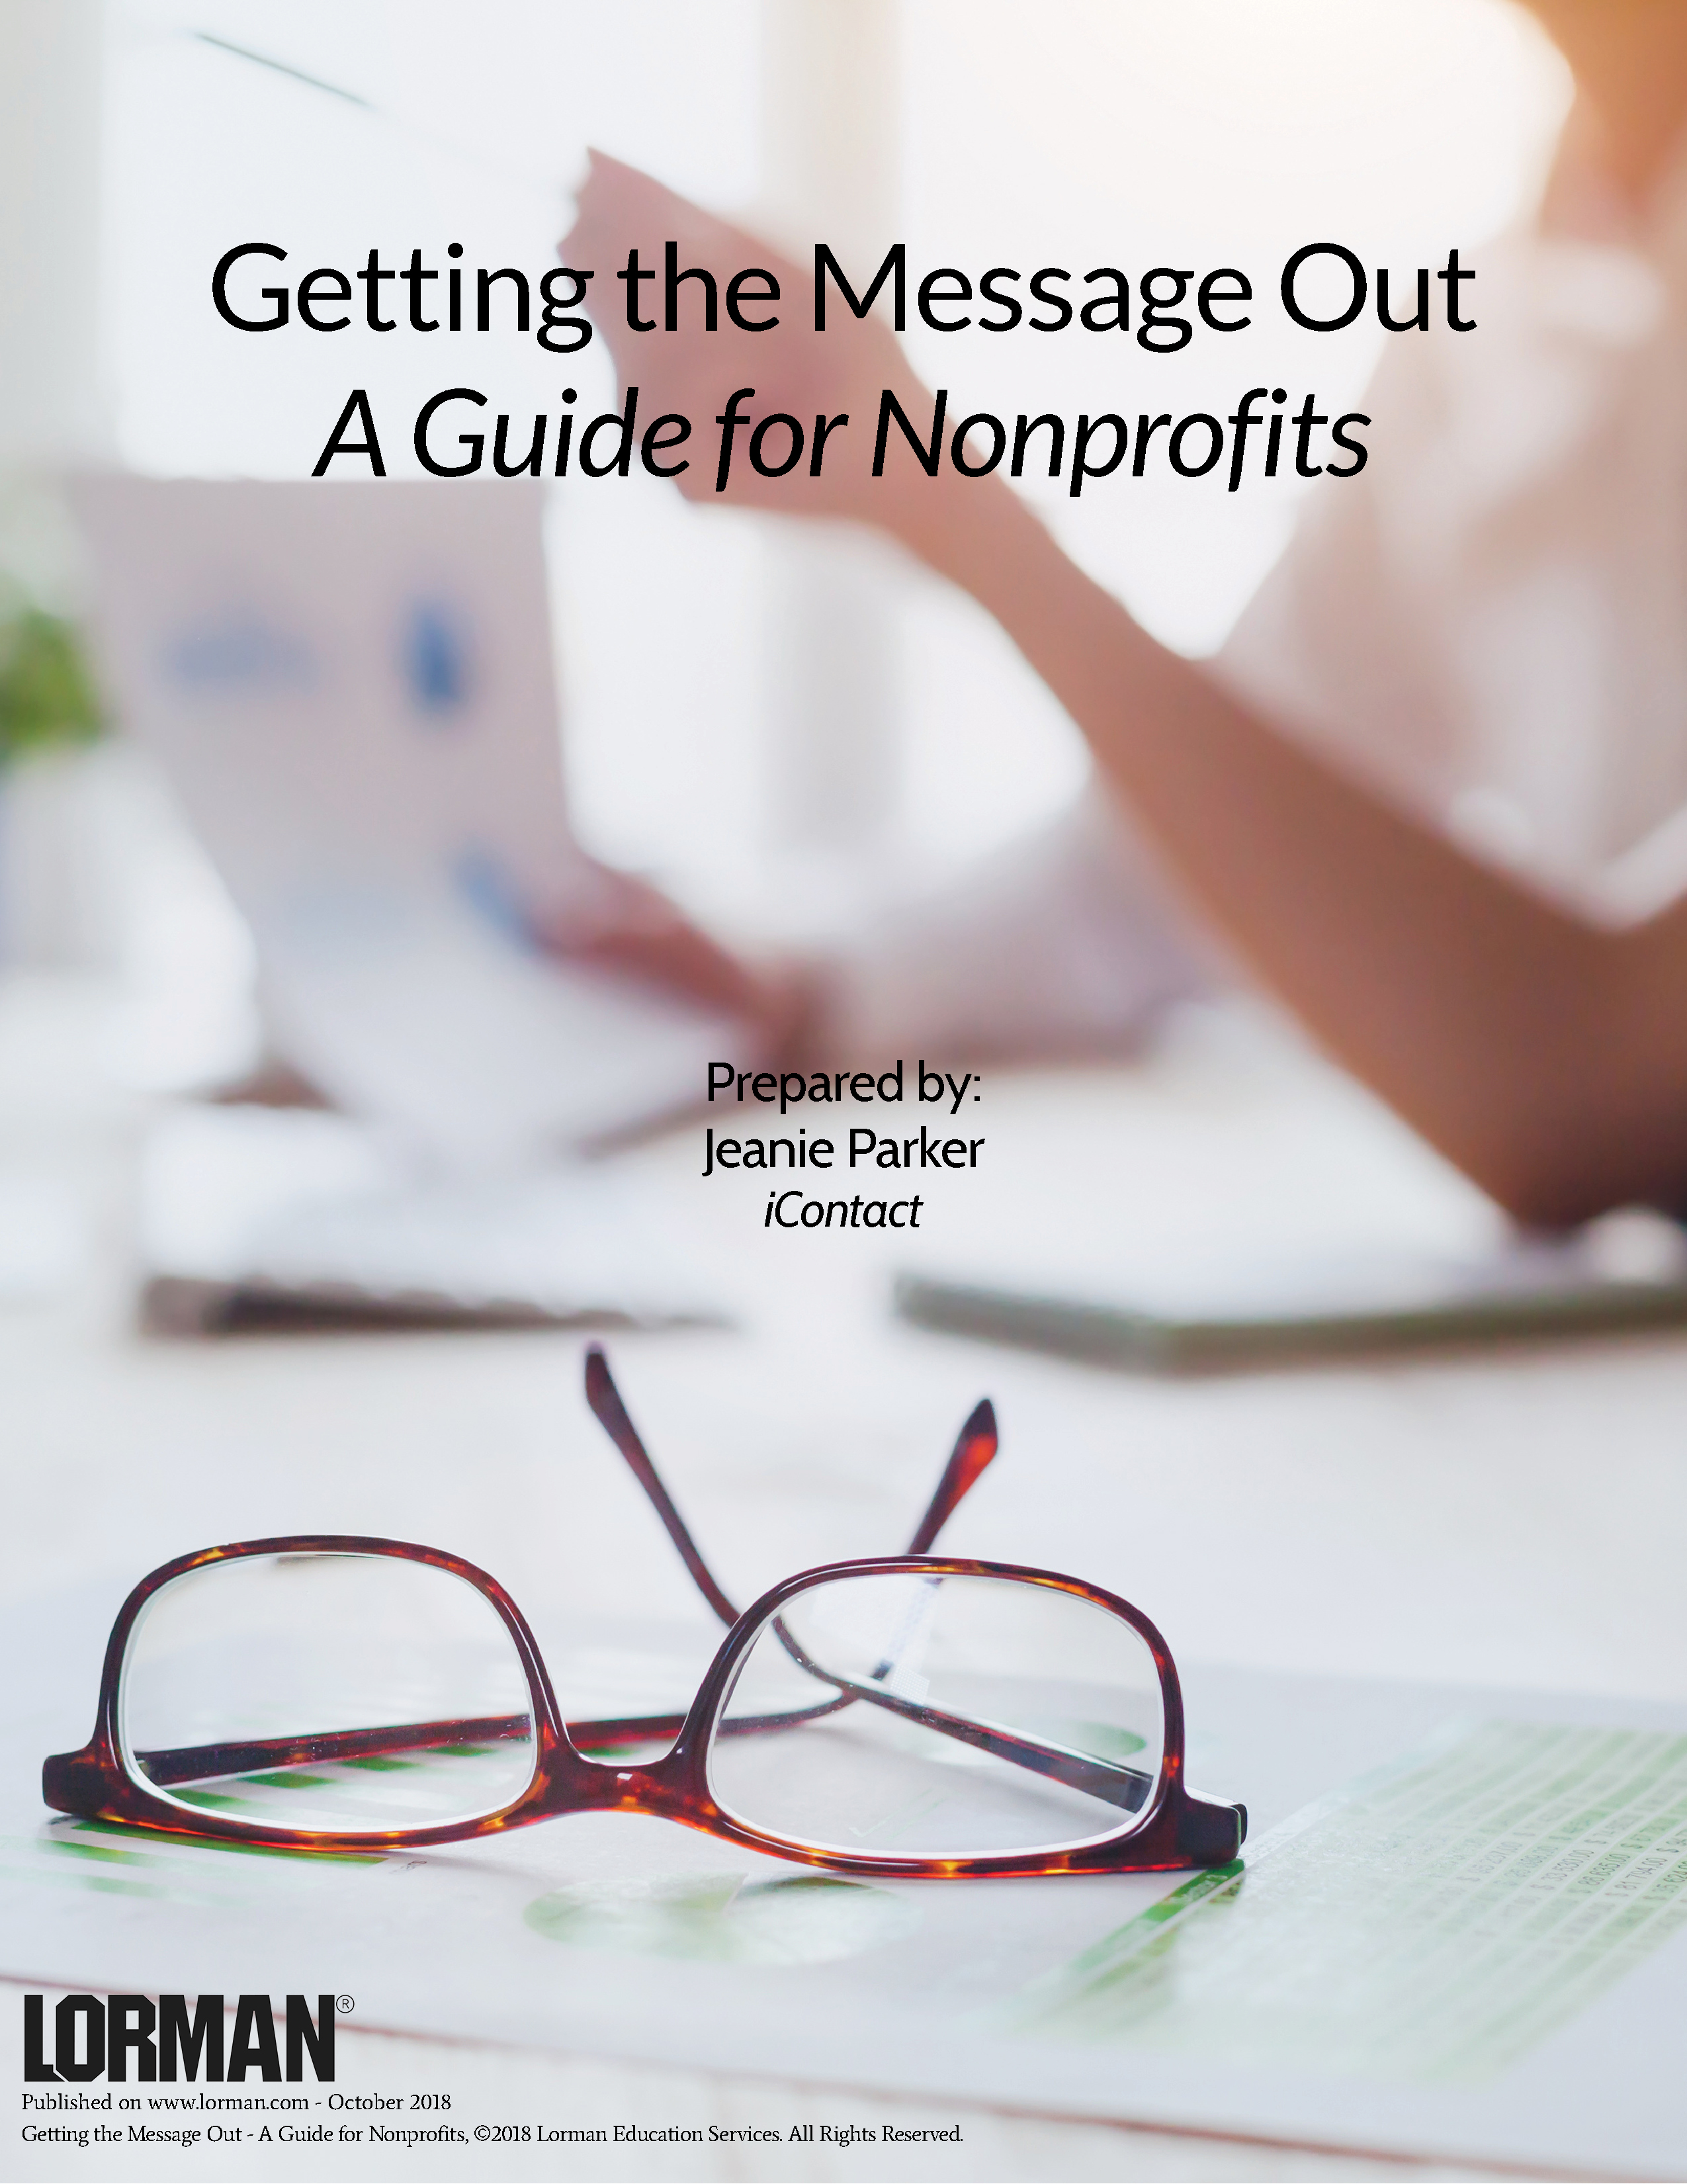 Getting the Message Out: A Guide for Nonprofits